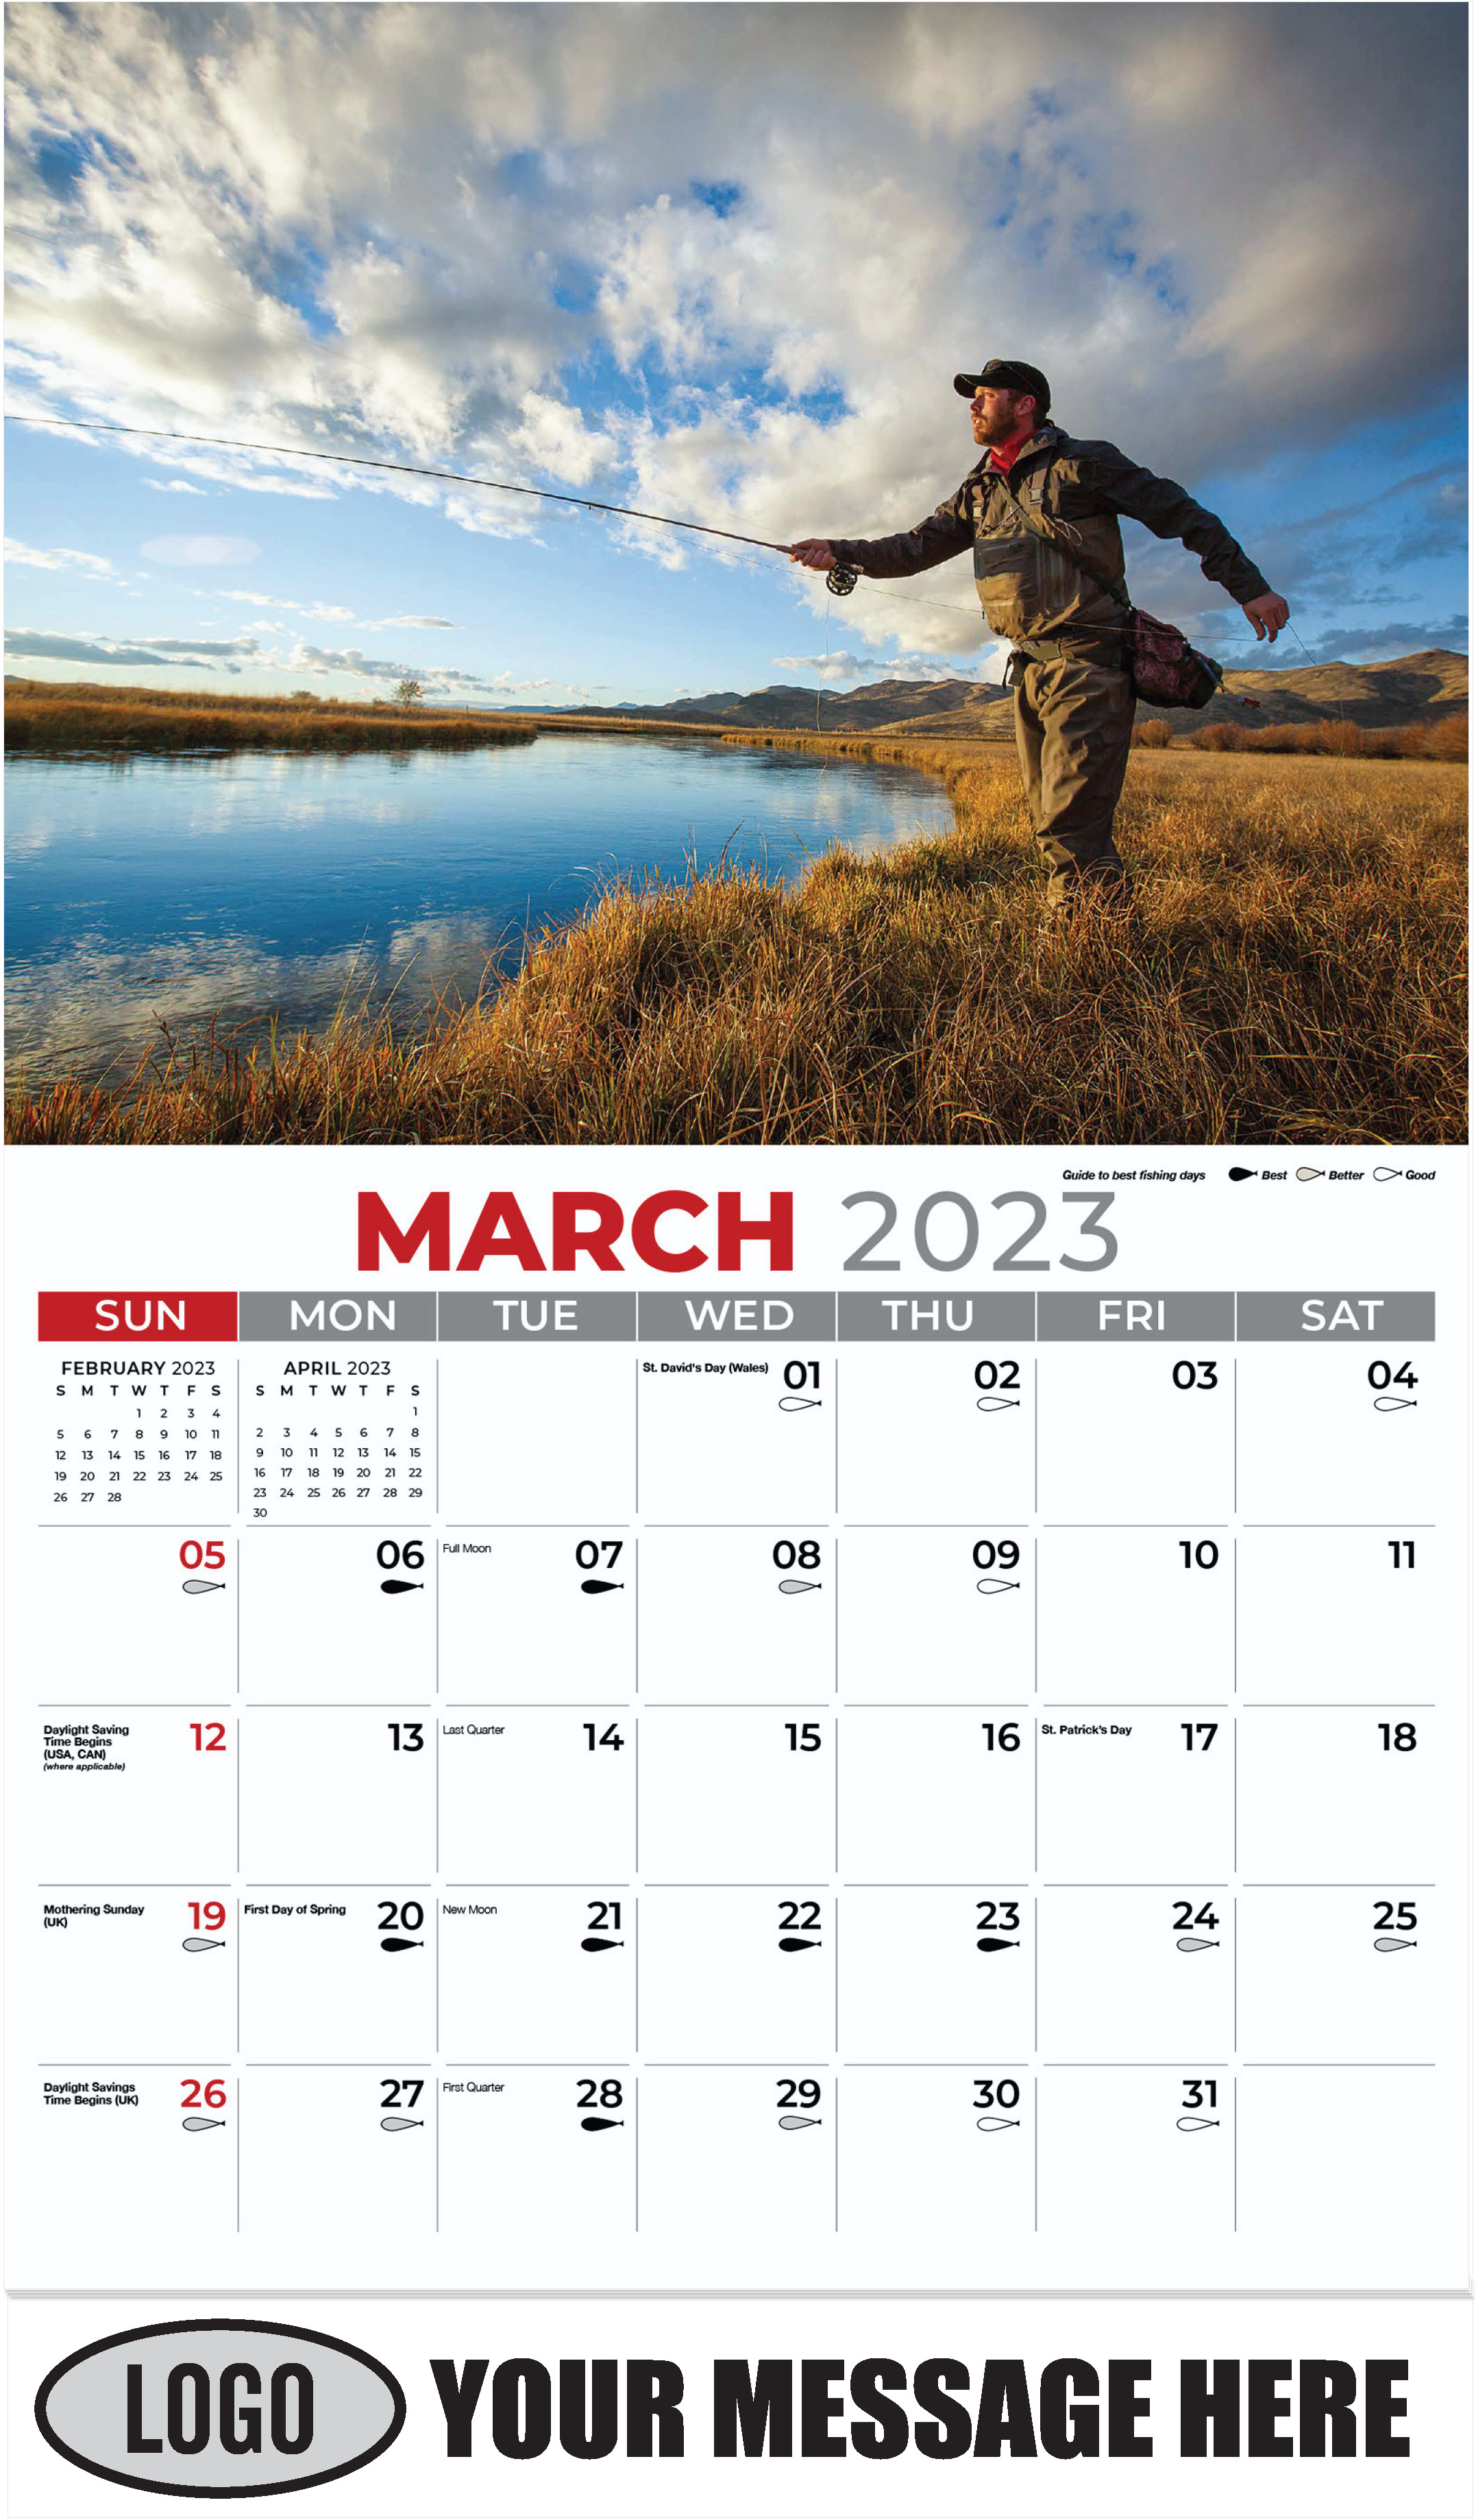 March - Fishing & Hunting 2023 Promotional Calendar